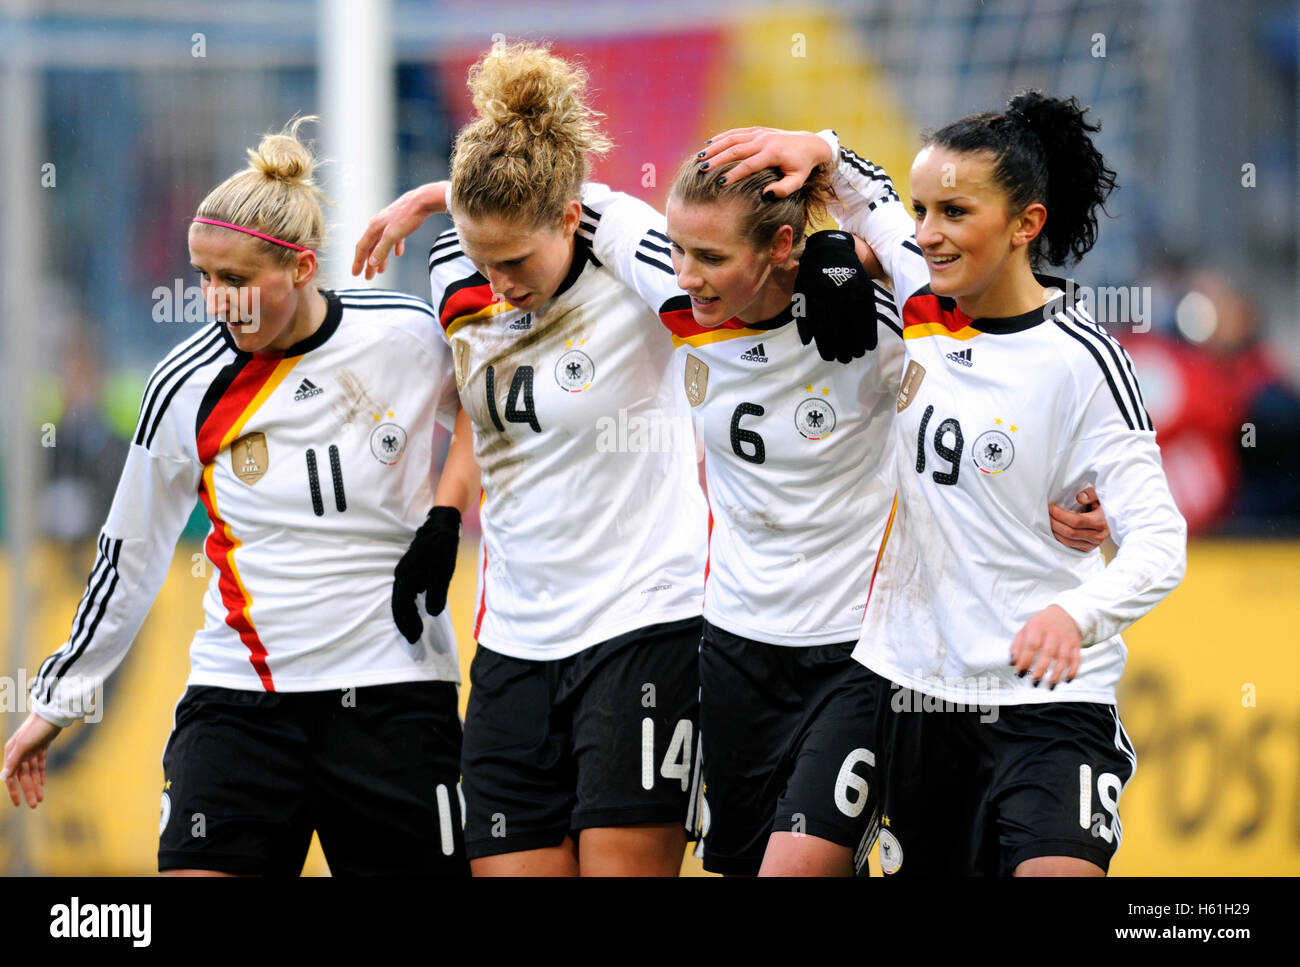 Elation of German team after the 2:0 by Simone Laudehr, from left: Anja Mittag, Kim Kulig, Simone Laudehr, Fatmire Bajramaj, Stock Photo